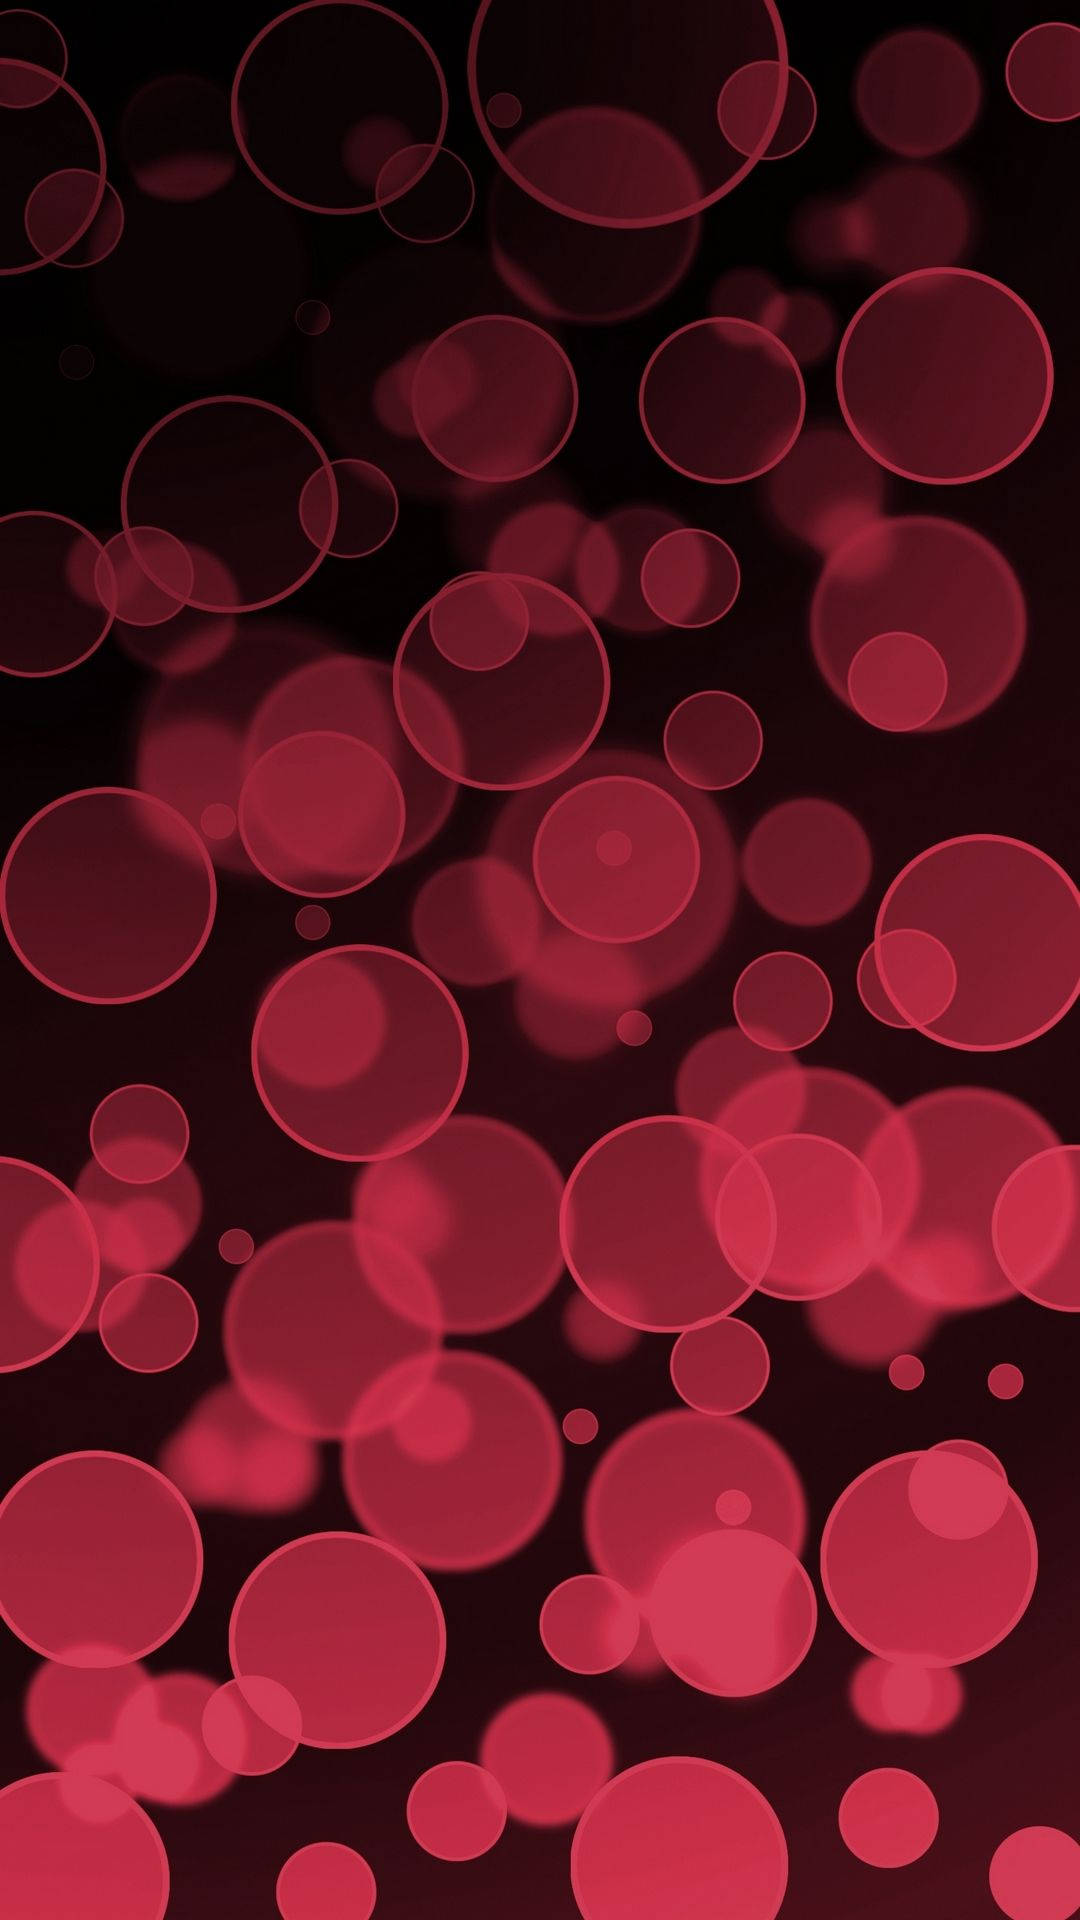 Translucent Red Circles Background